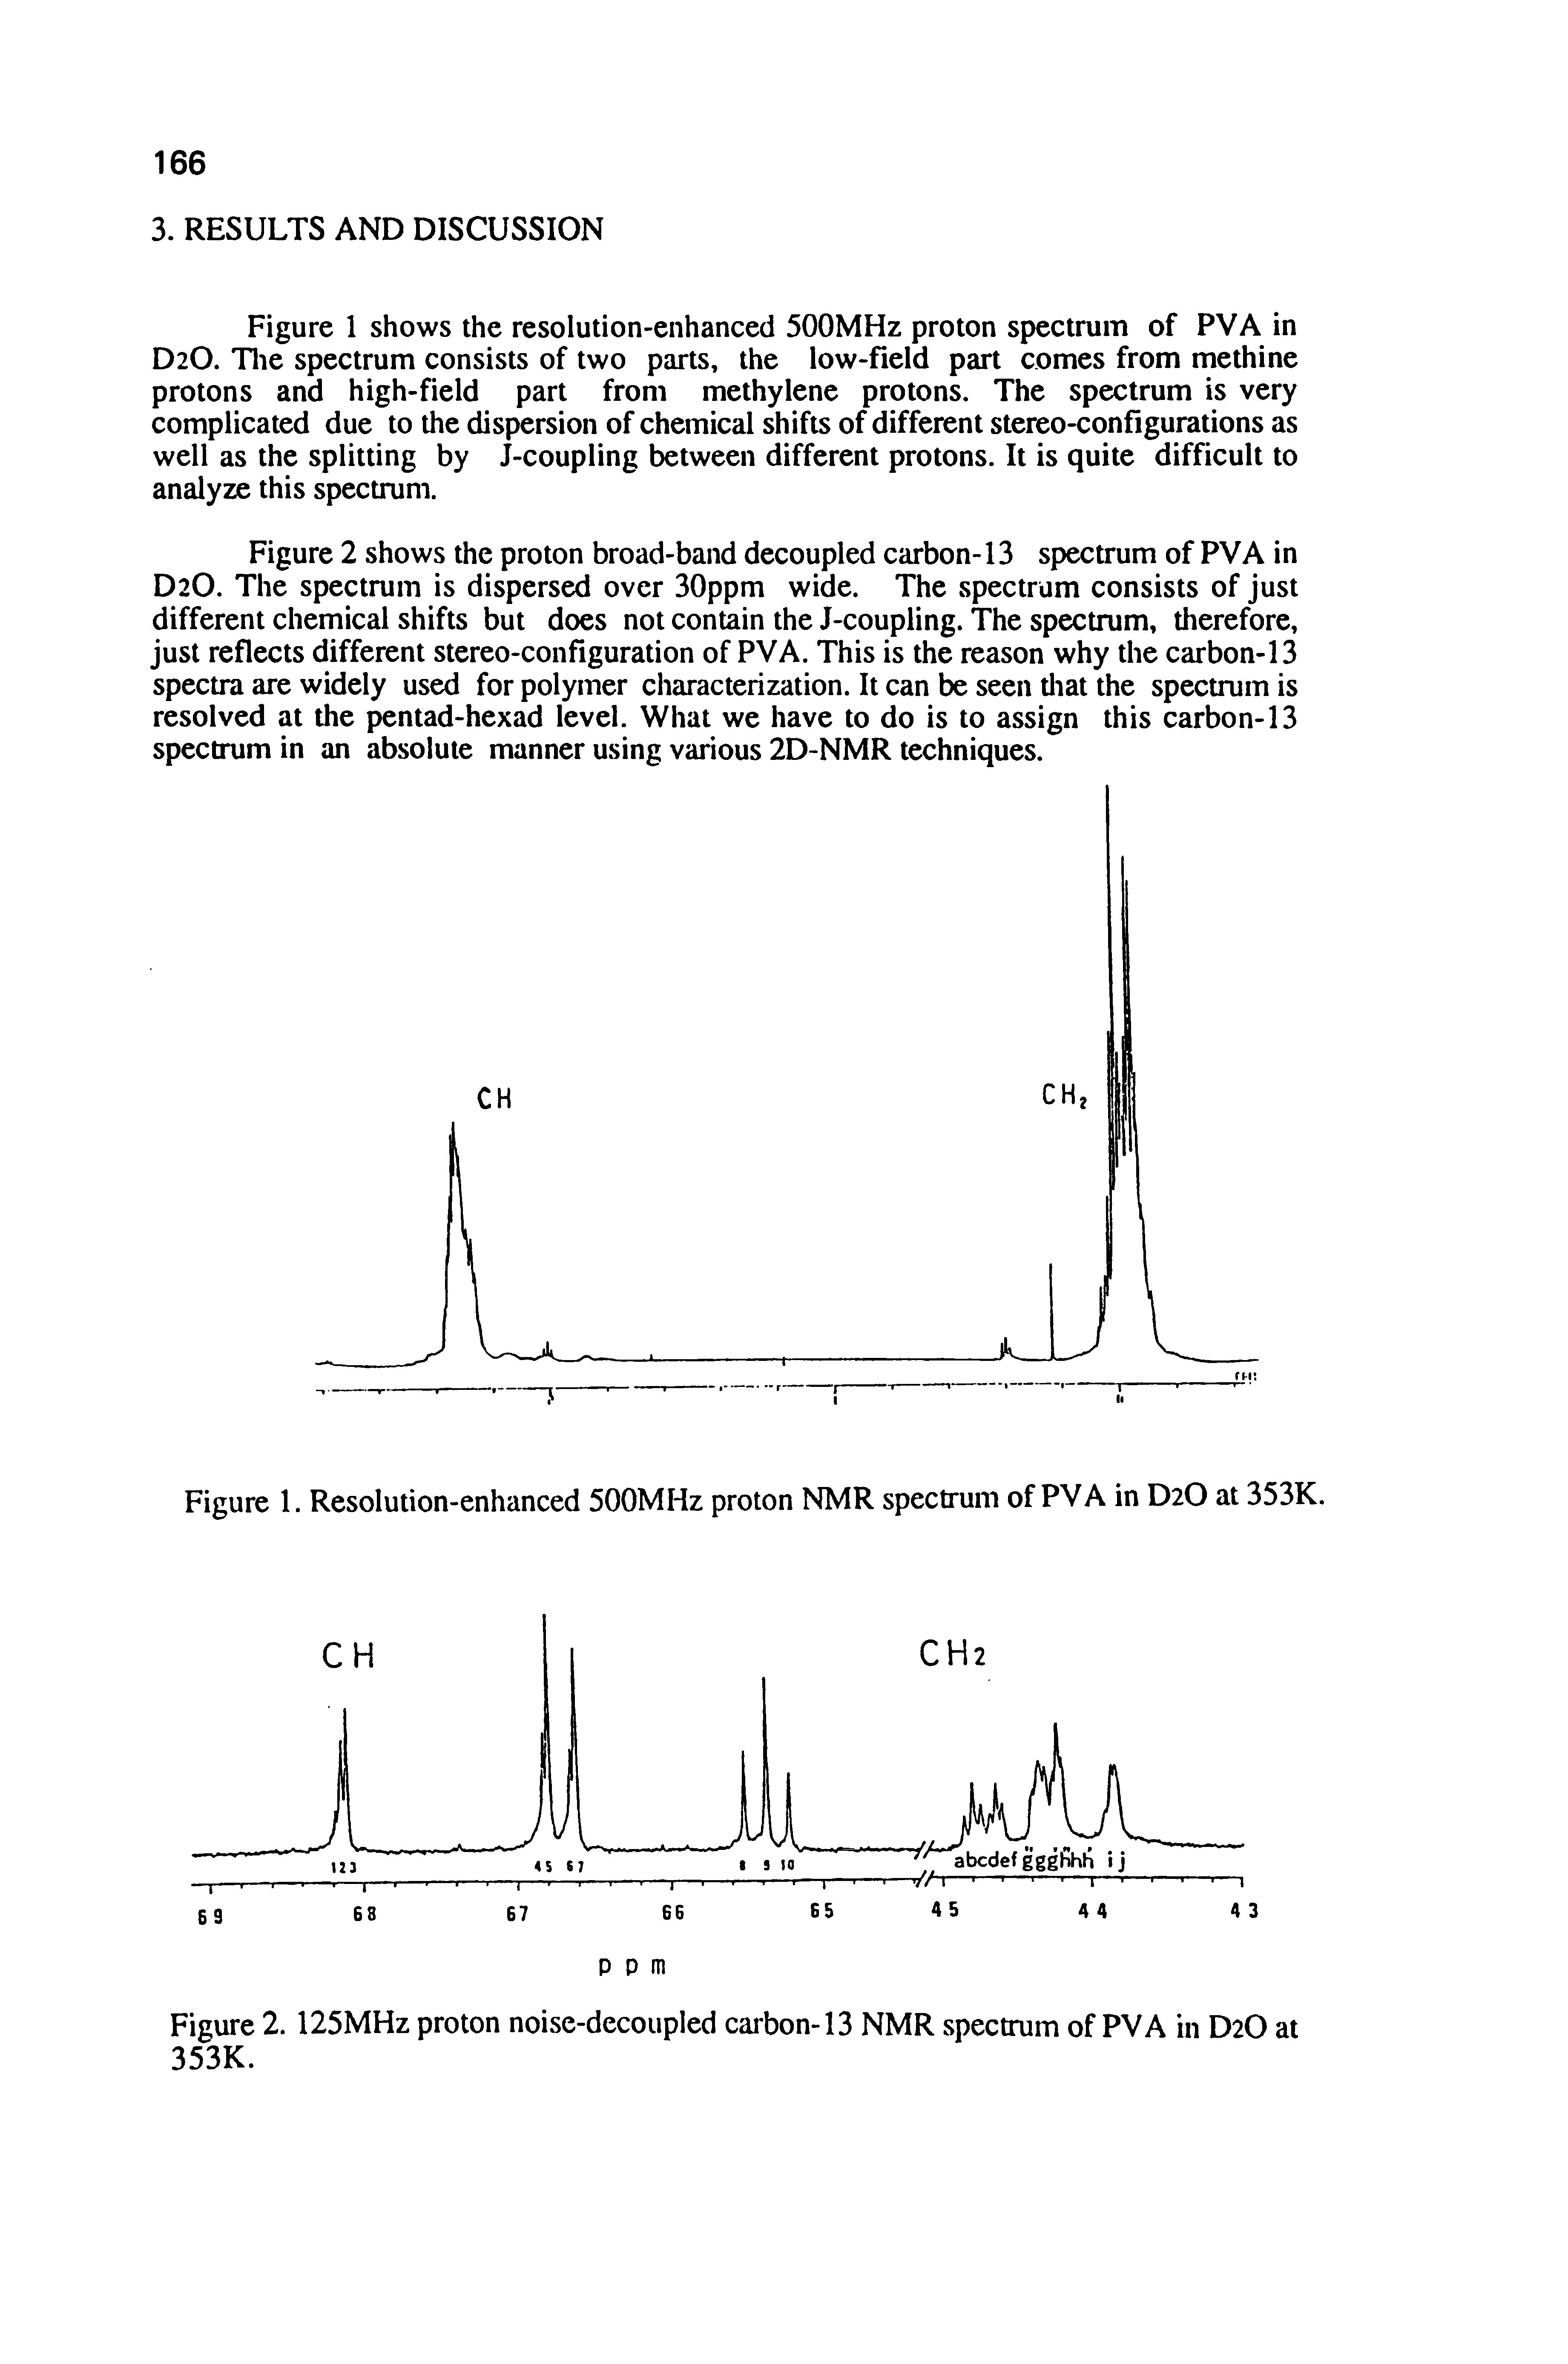 Figure 1. Resolution-enhanced 500MHz proton NMR spectrum of PVA in D2O at 353K.